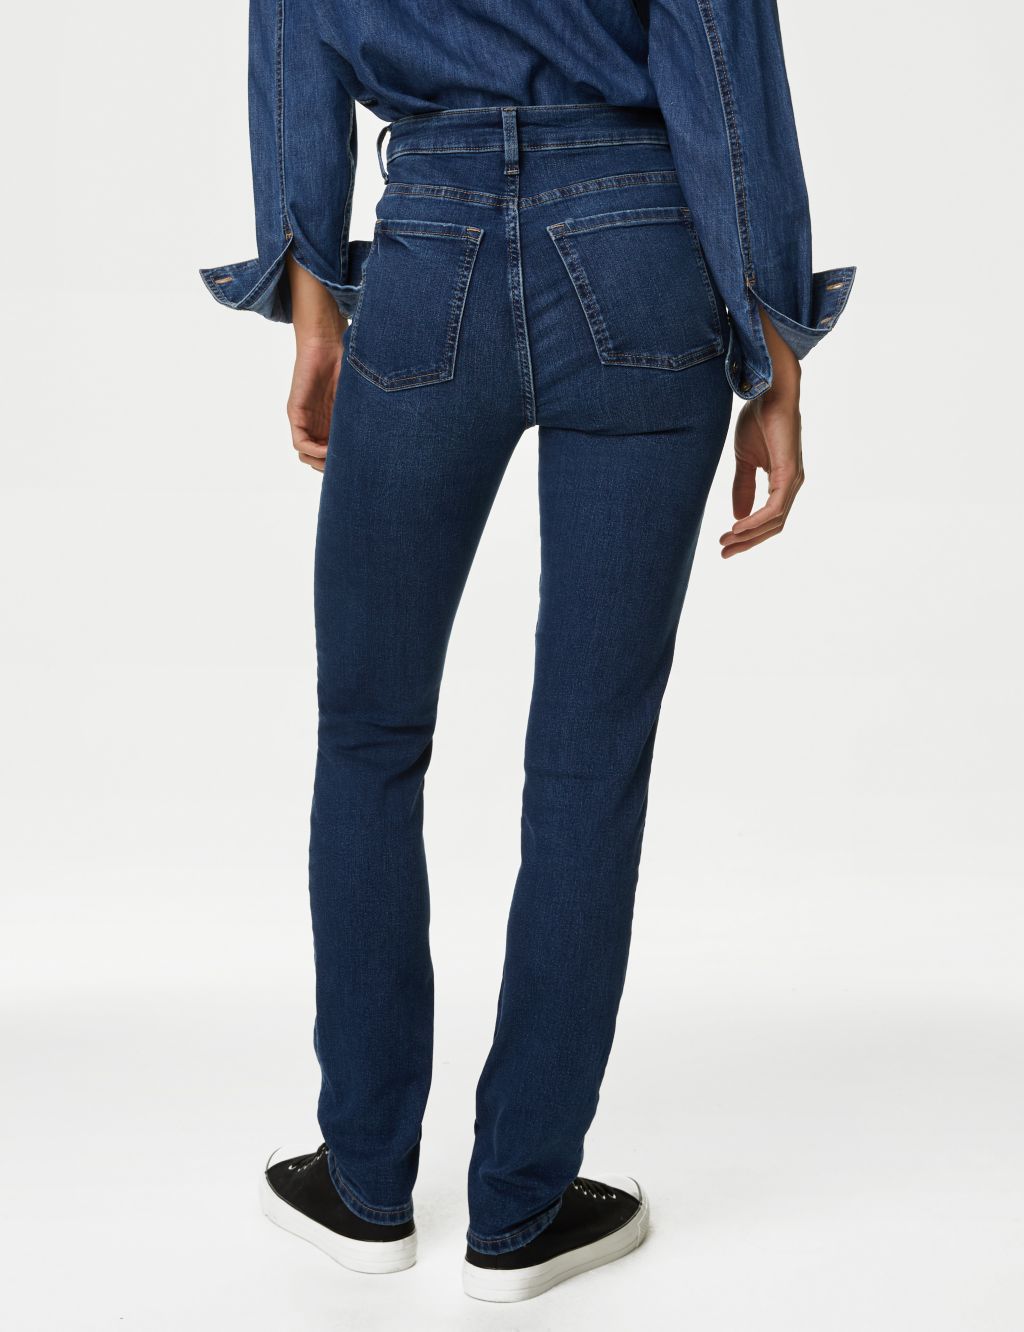 Lily Slim Fit Jeans with Stretch image 5